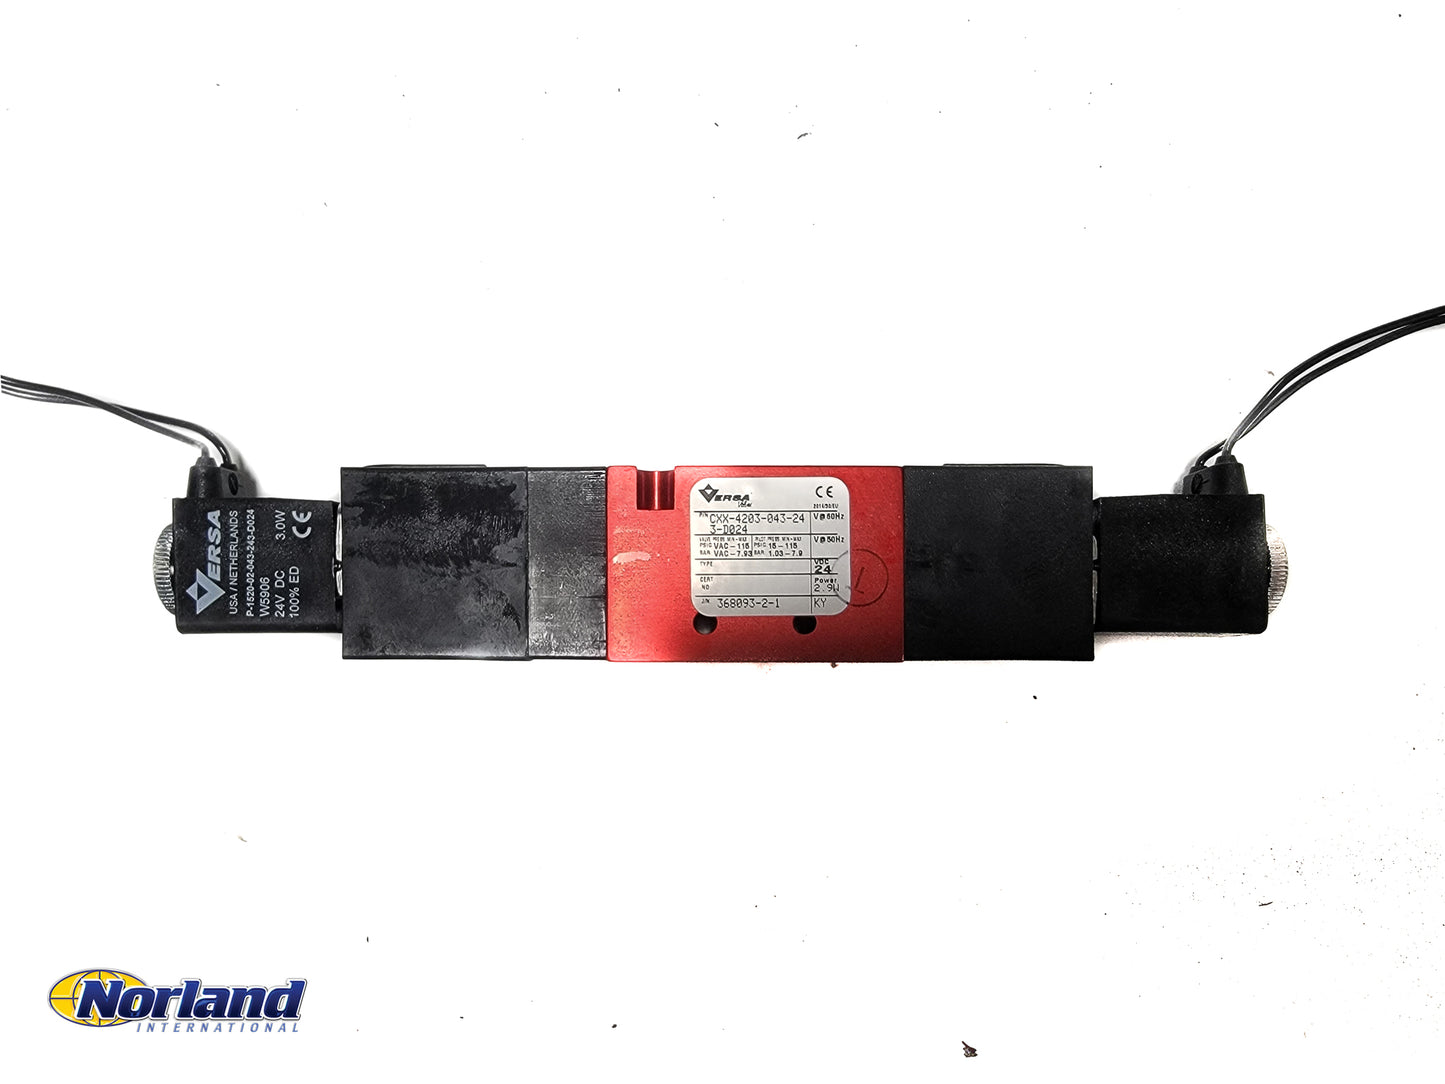 1/8" FPT 4-Way, 3 Position Solenoid